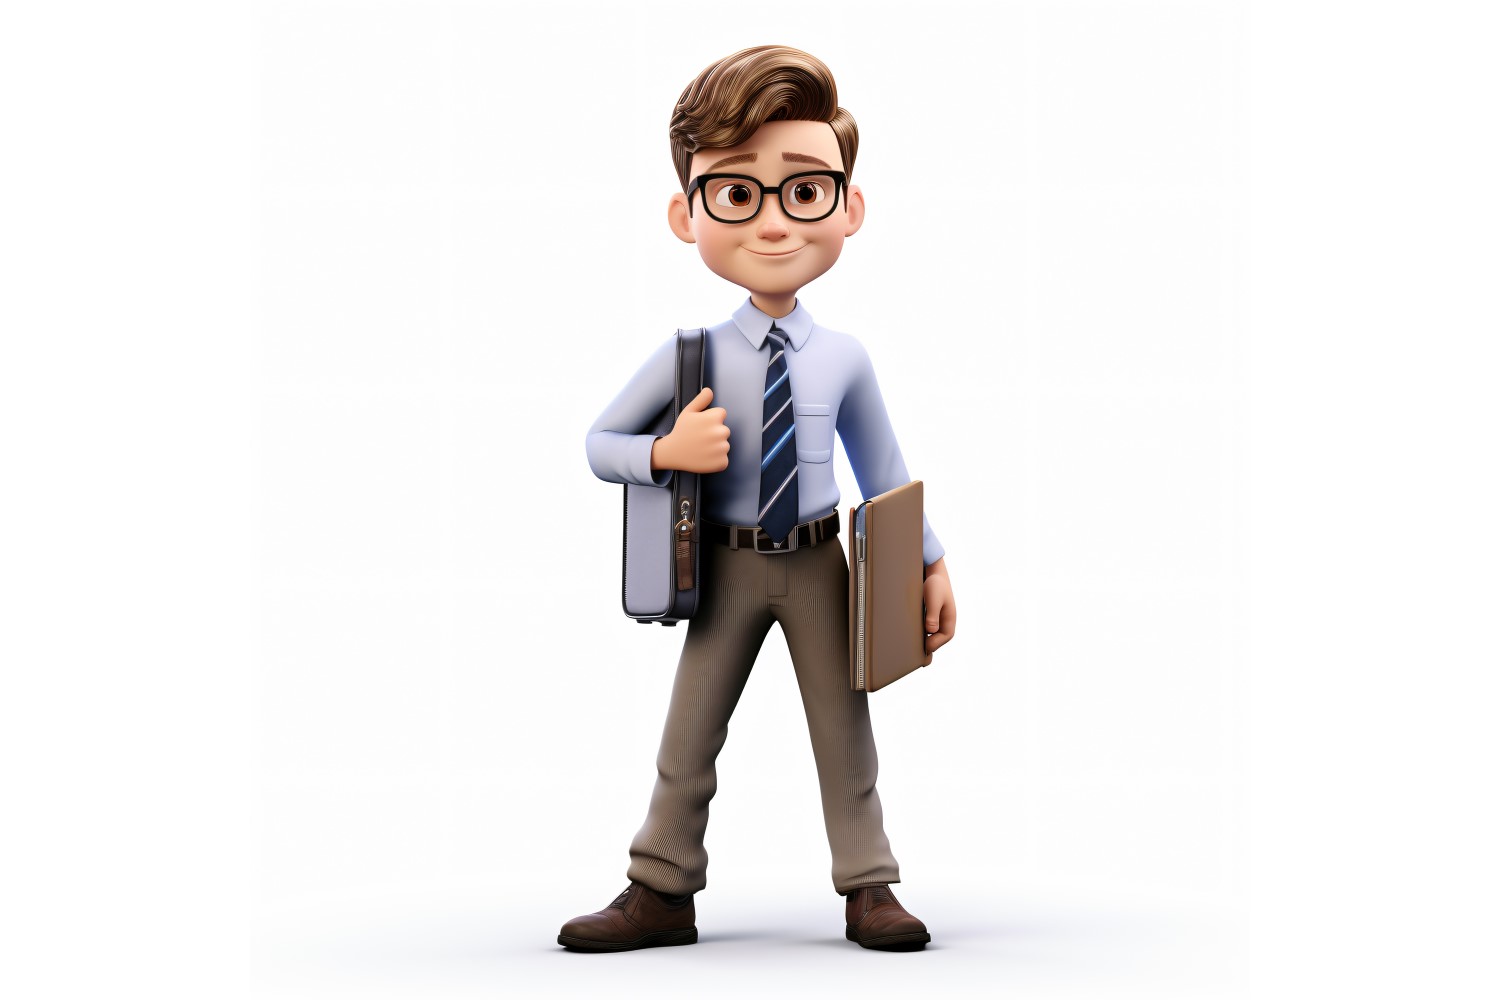 3D pixar Character Child Boy with relevant environment 62